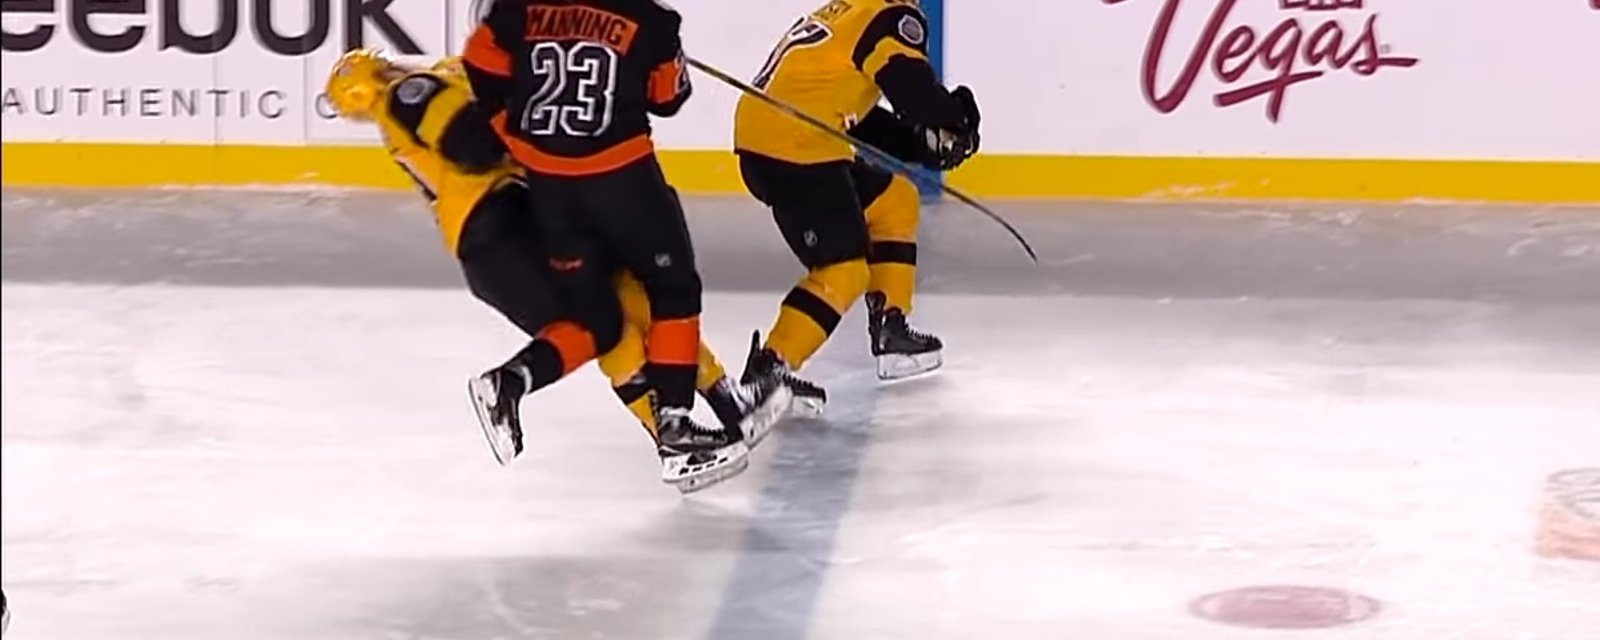 Player crushes his opponent with a devastating open-ice hit.